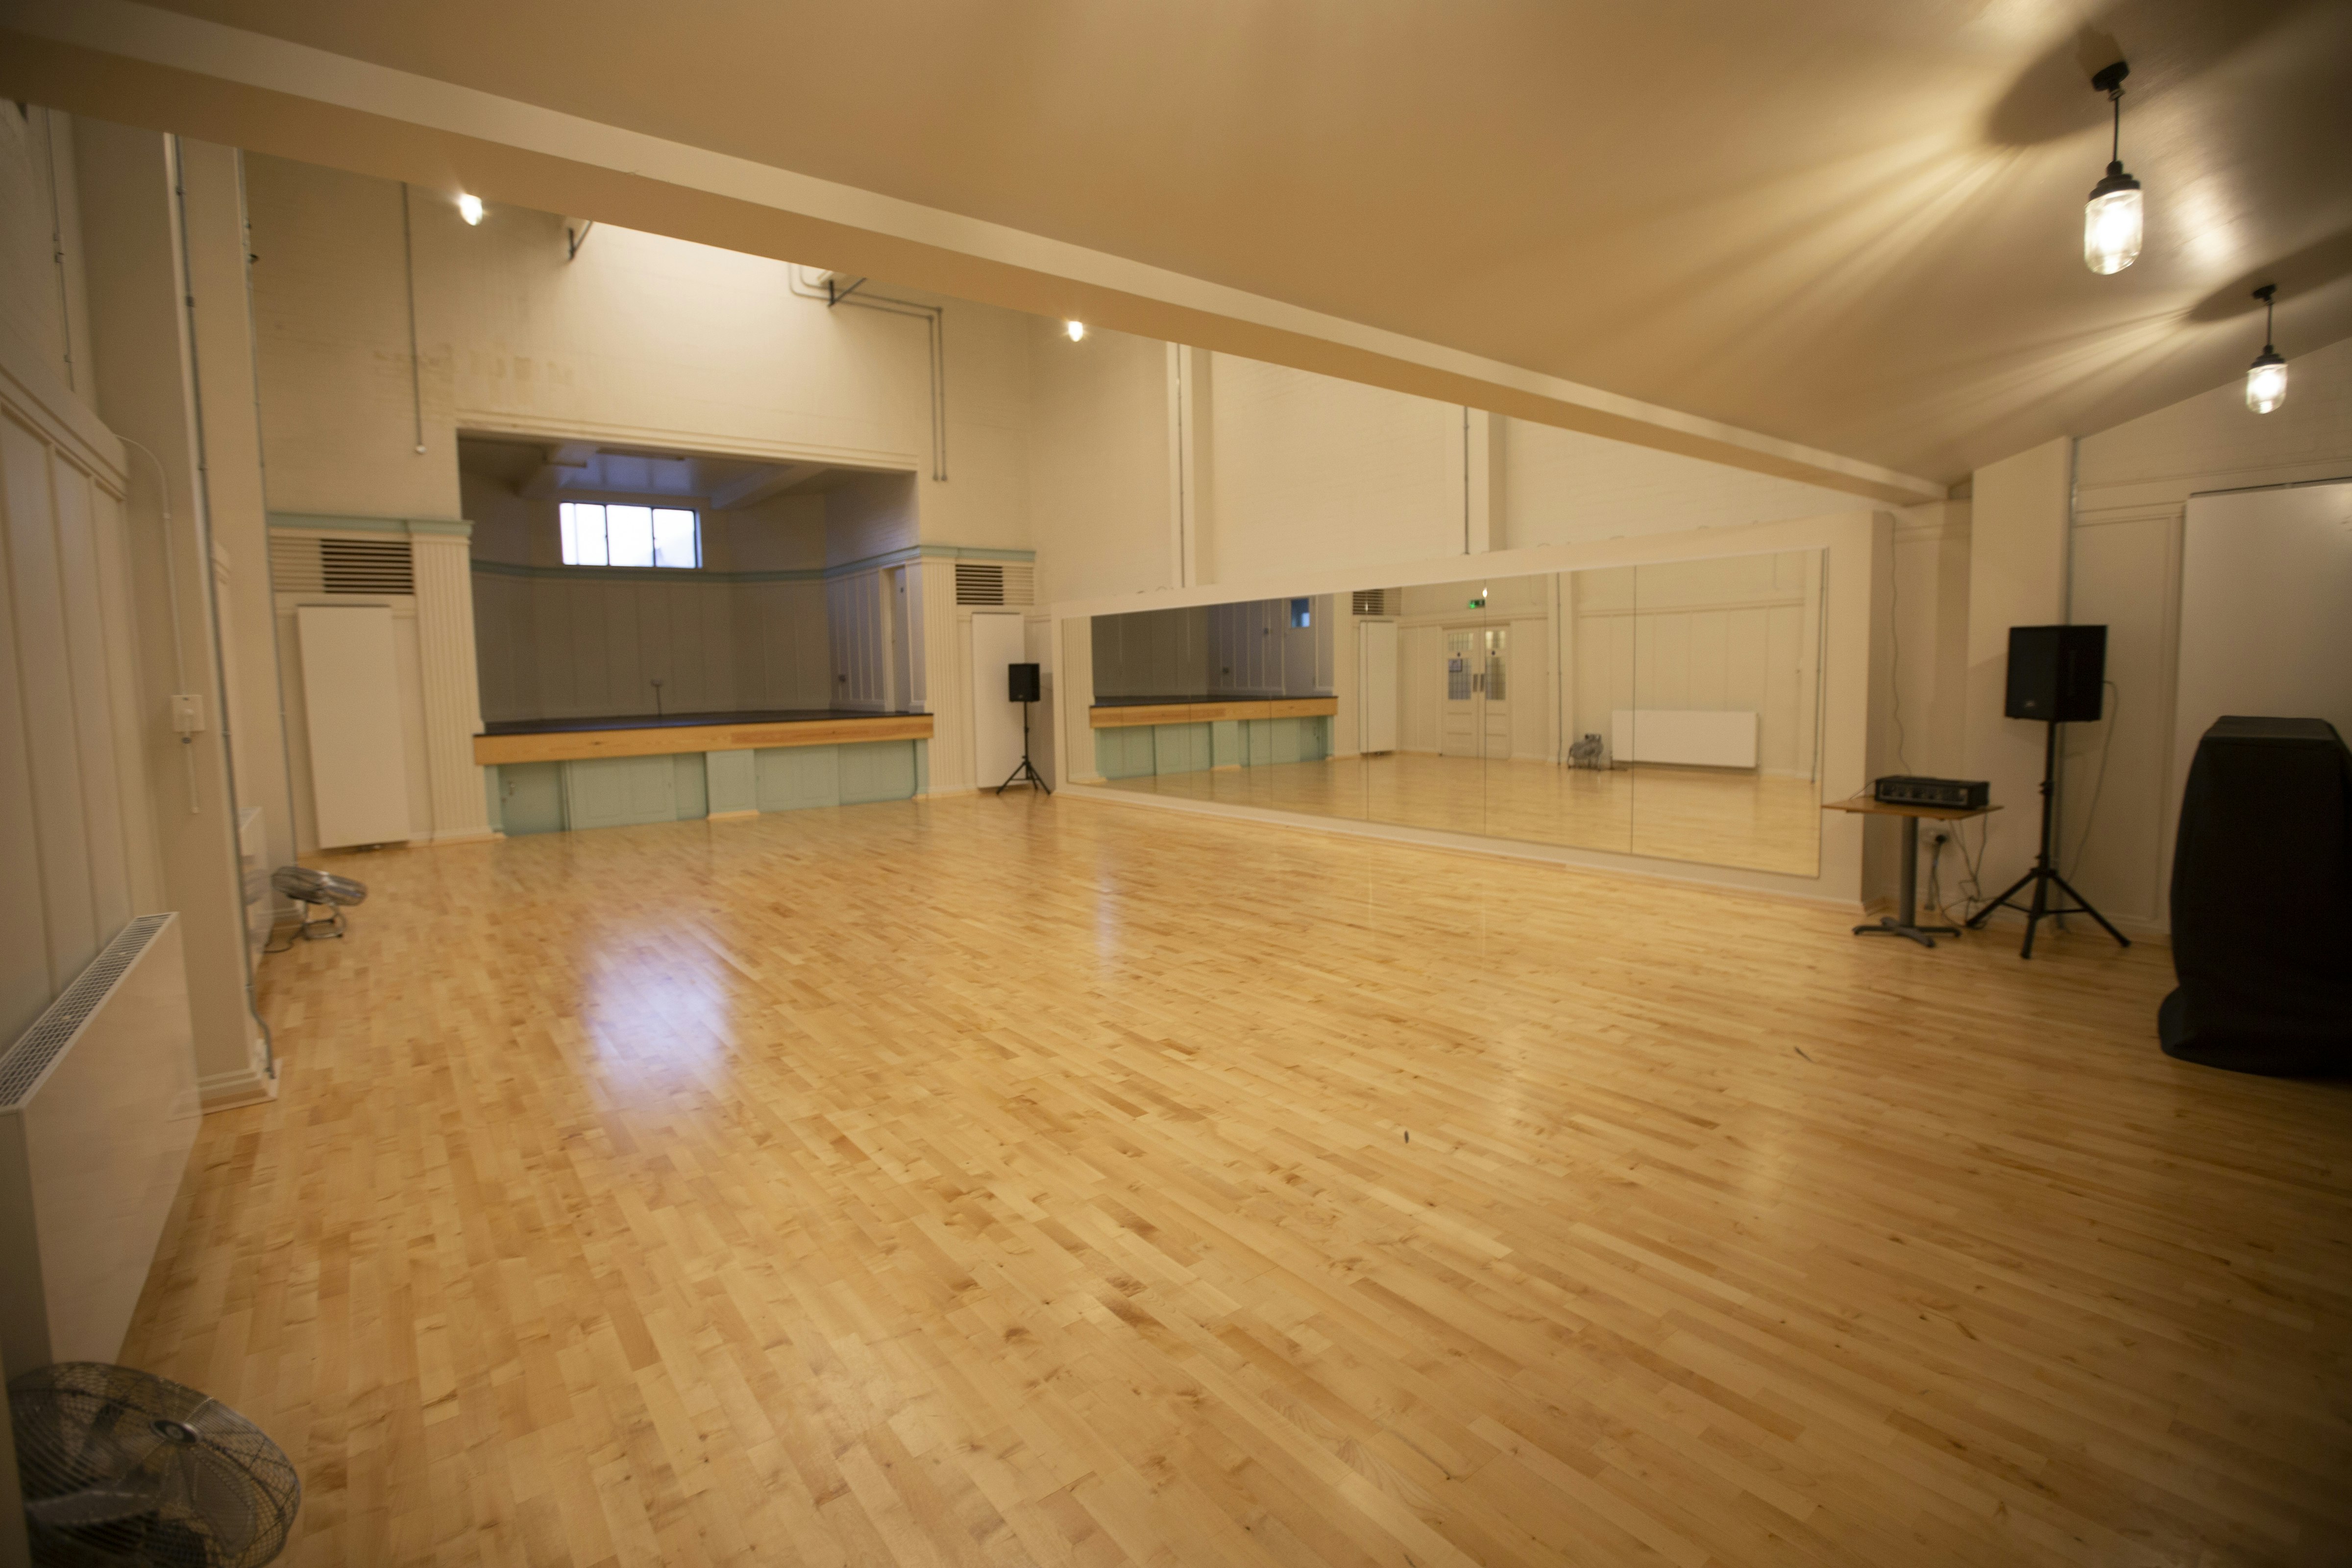 Ballrooms Venues in London - The International College of Musical Theatre 